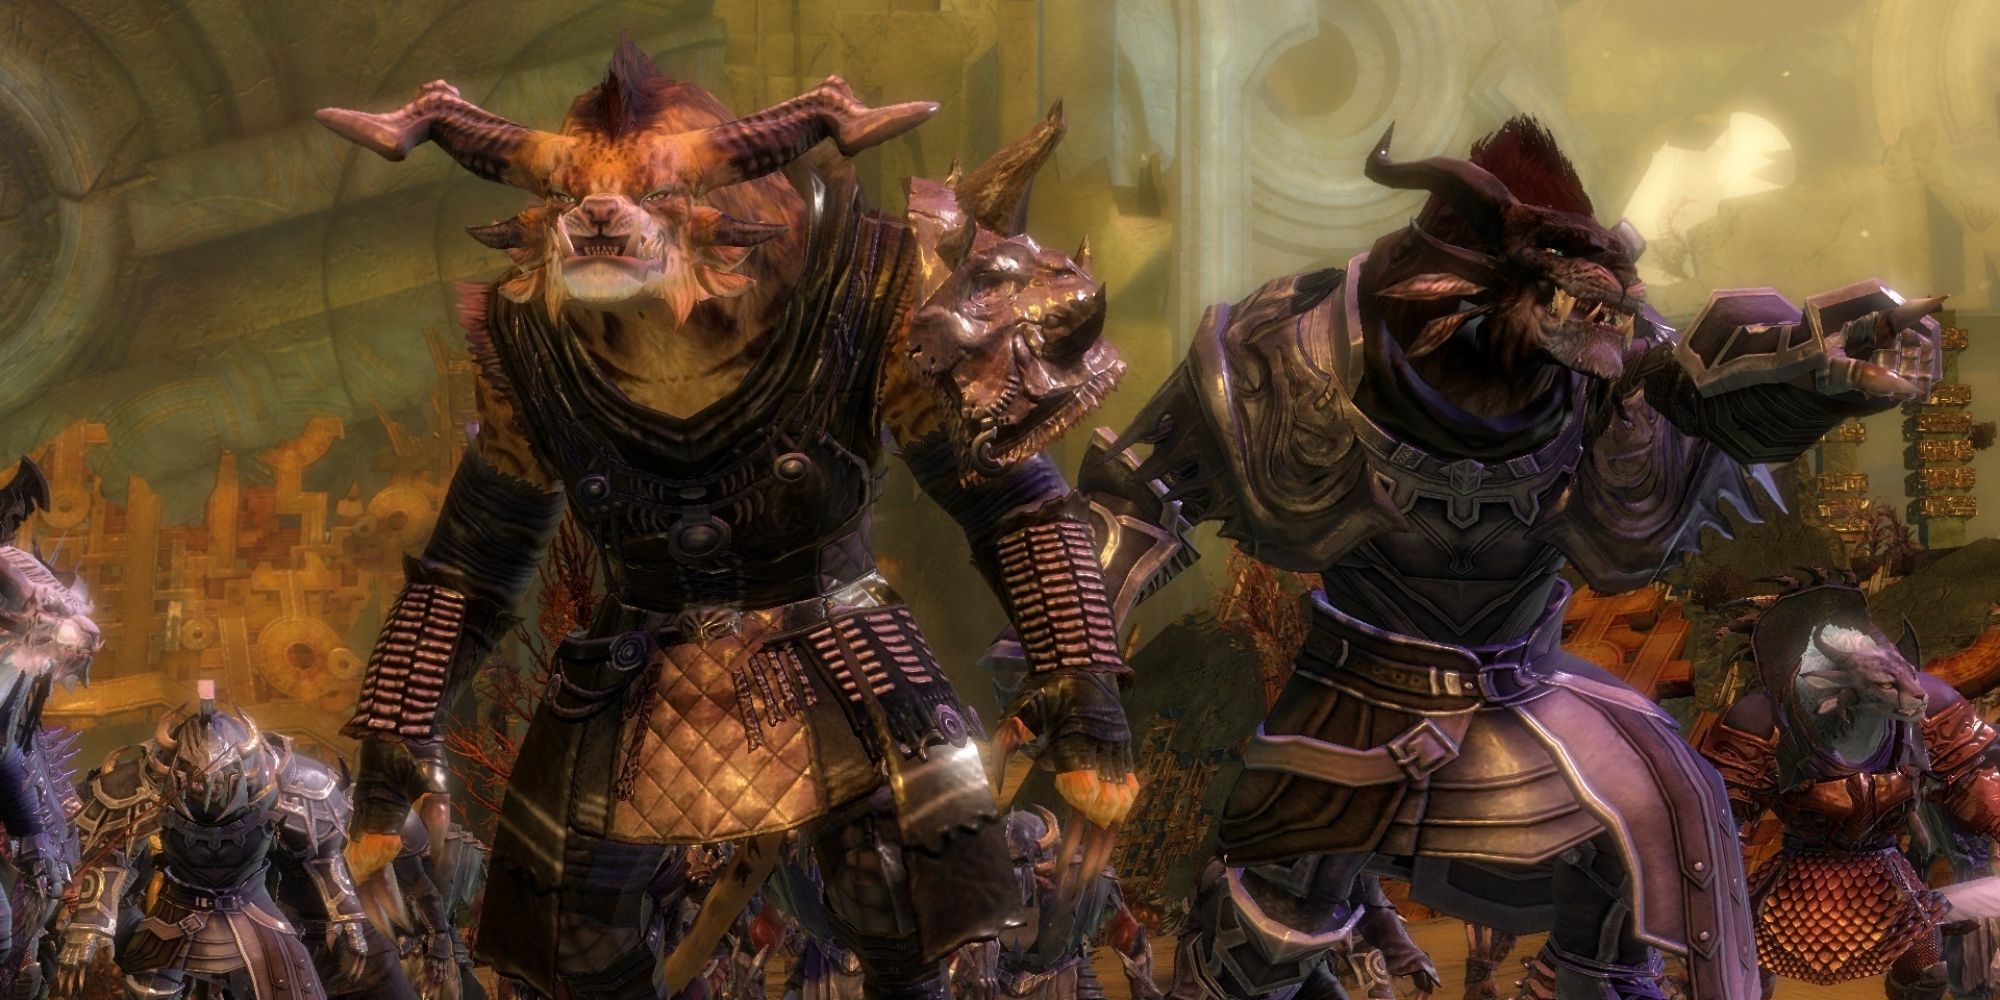 Guild Wars 2 Charr - Warband ready for combat